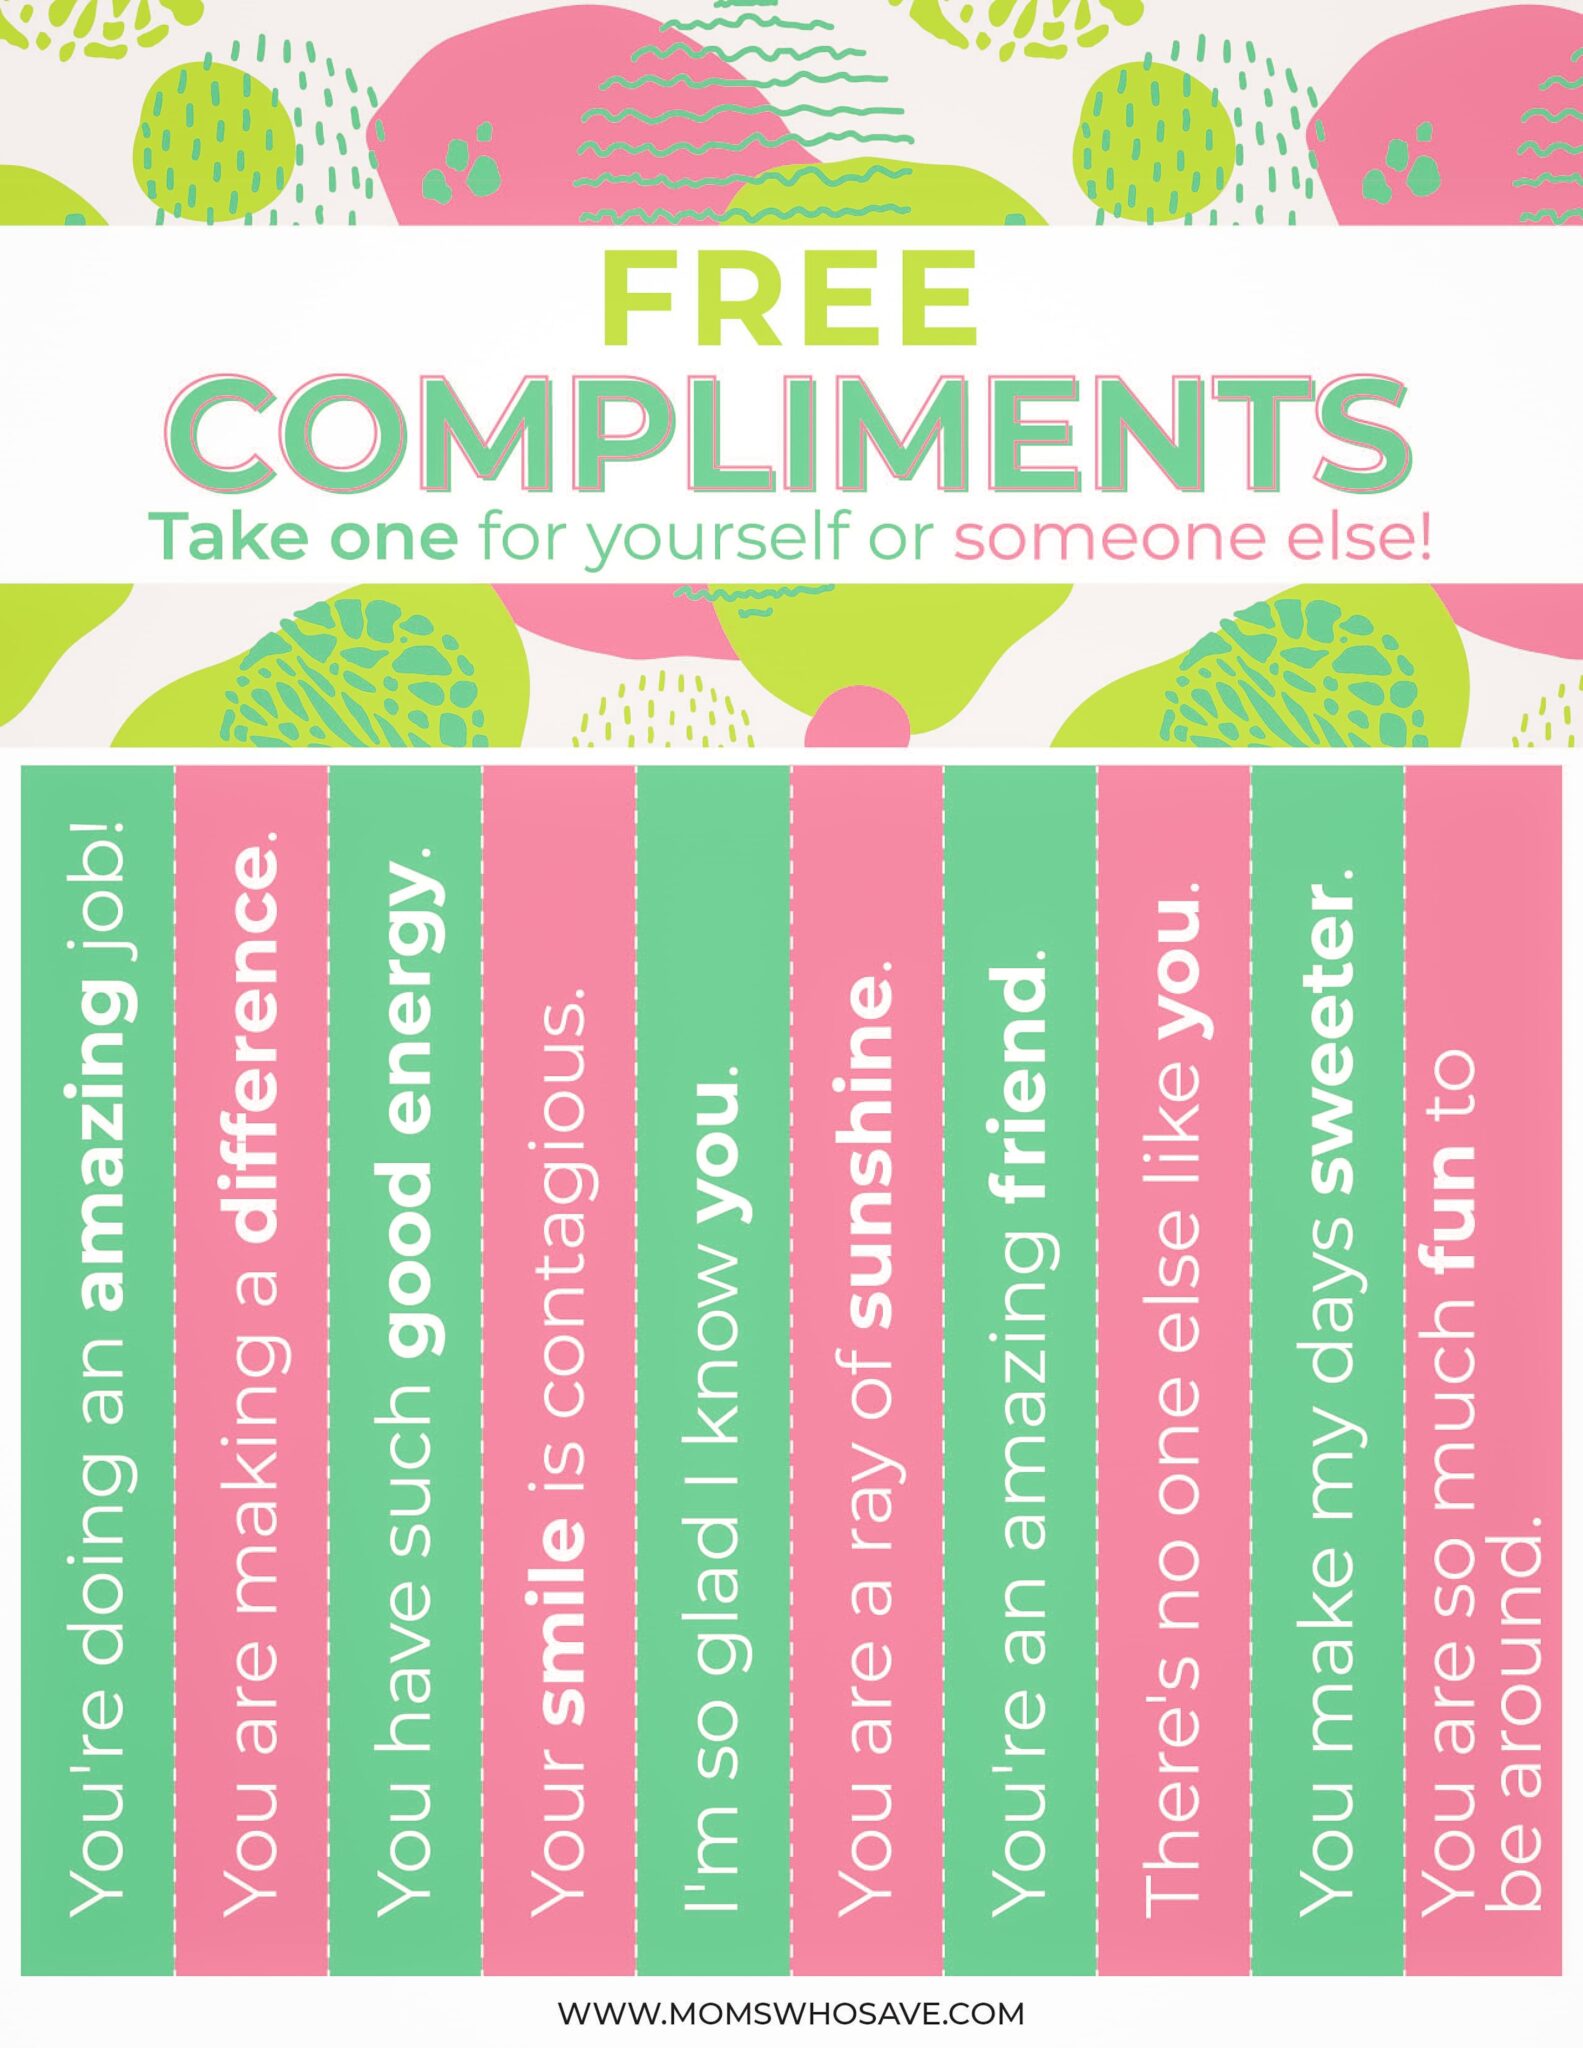 grab-this-free-compliments-printable-share-some-positivity